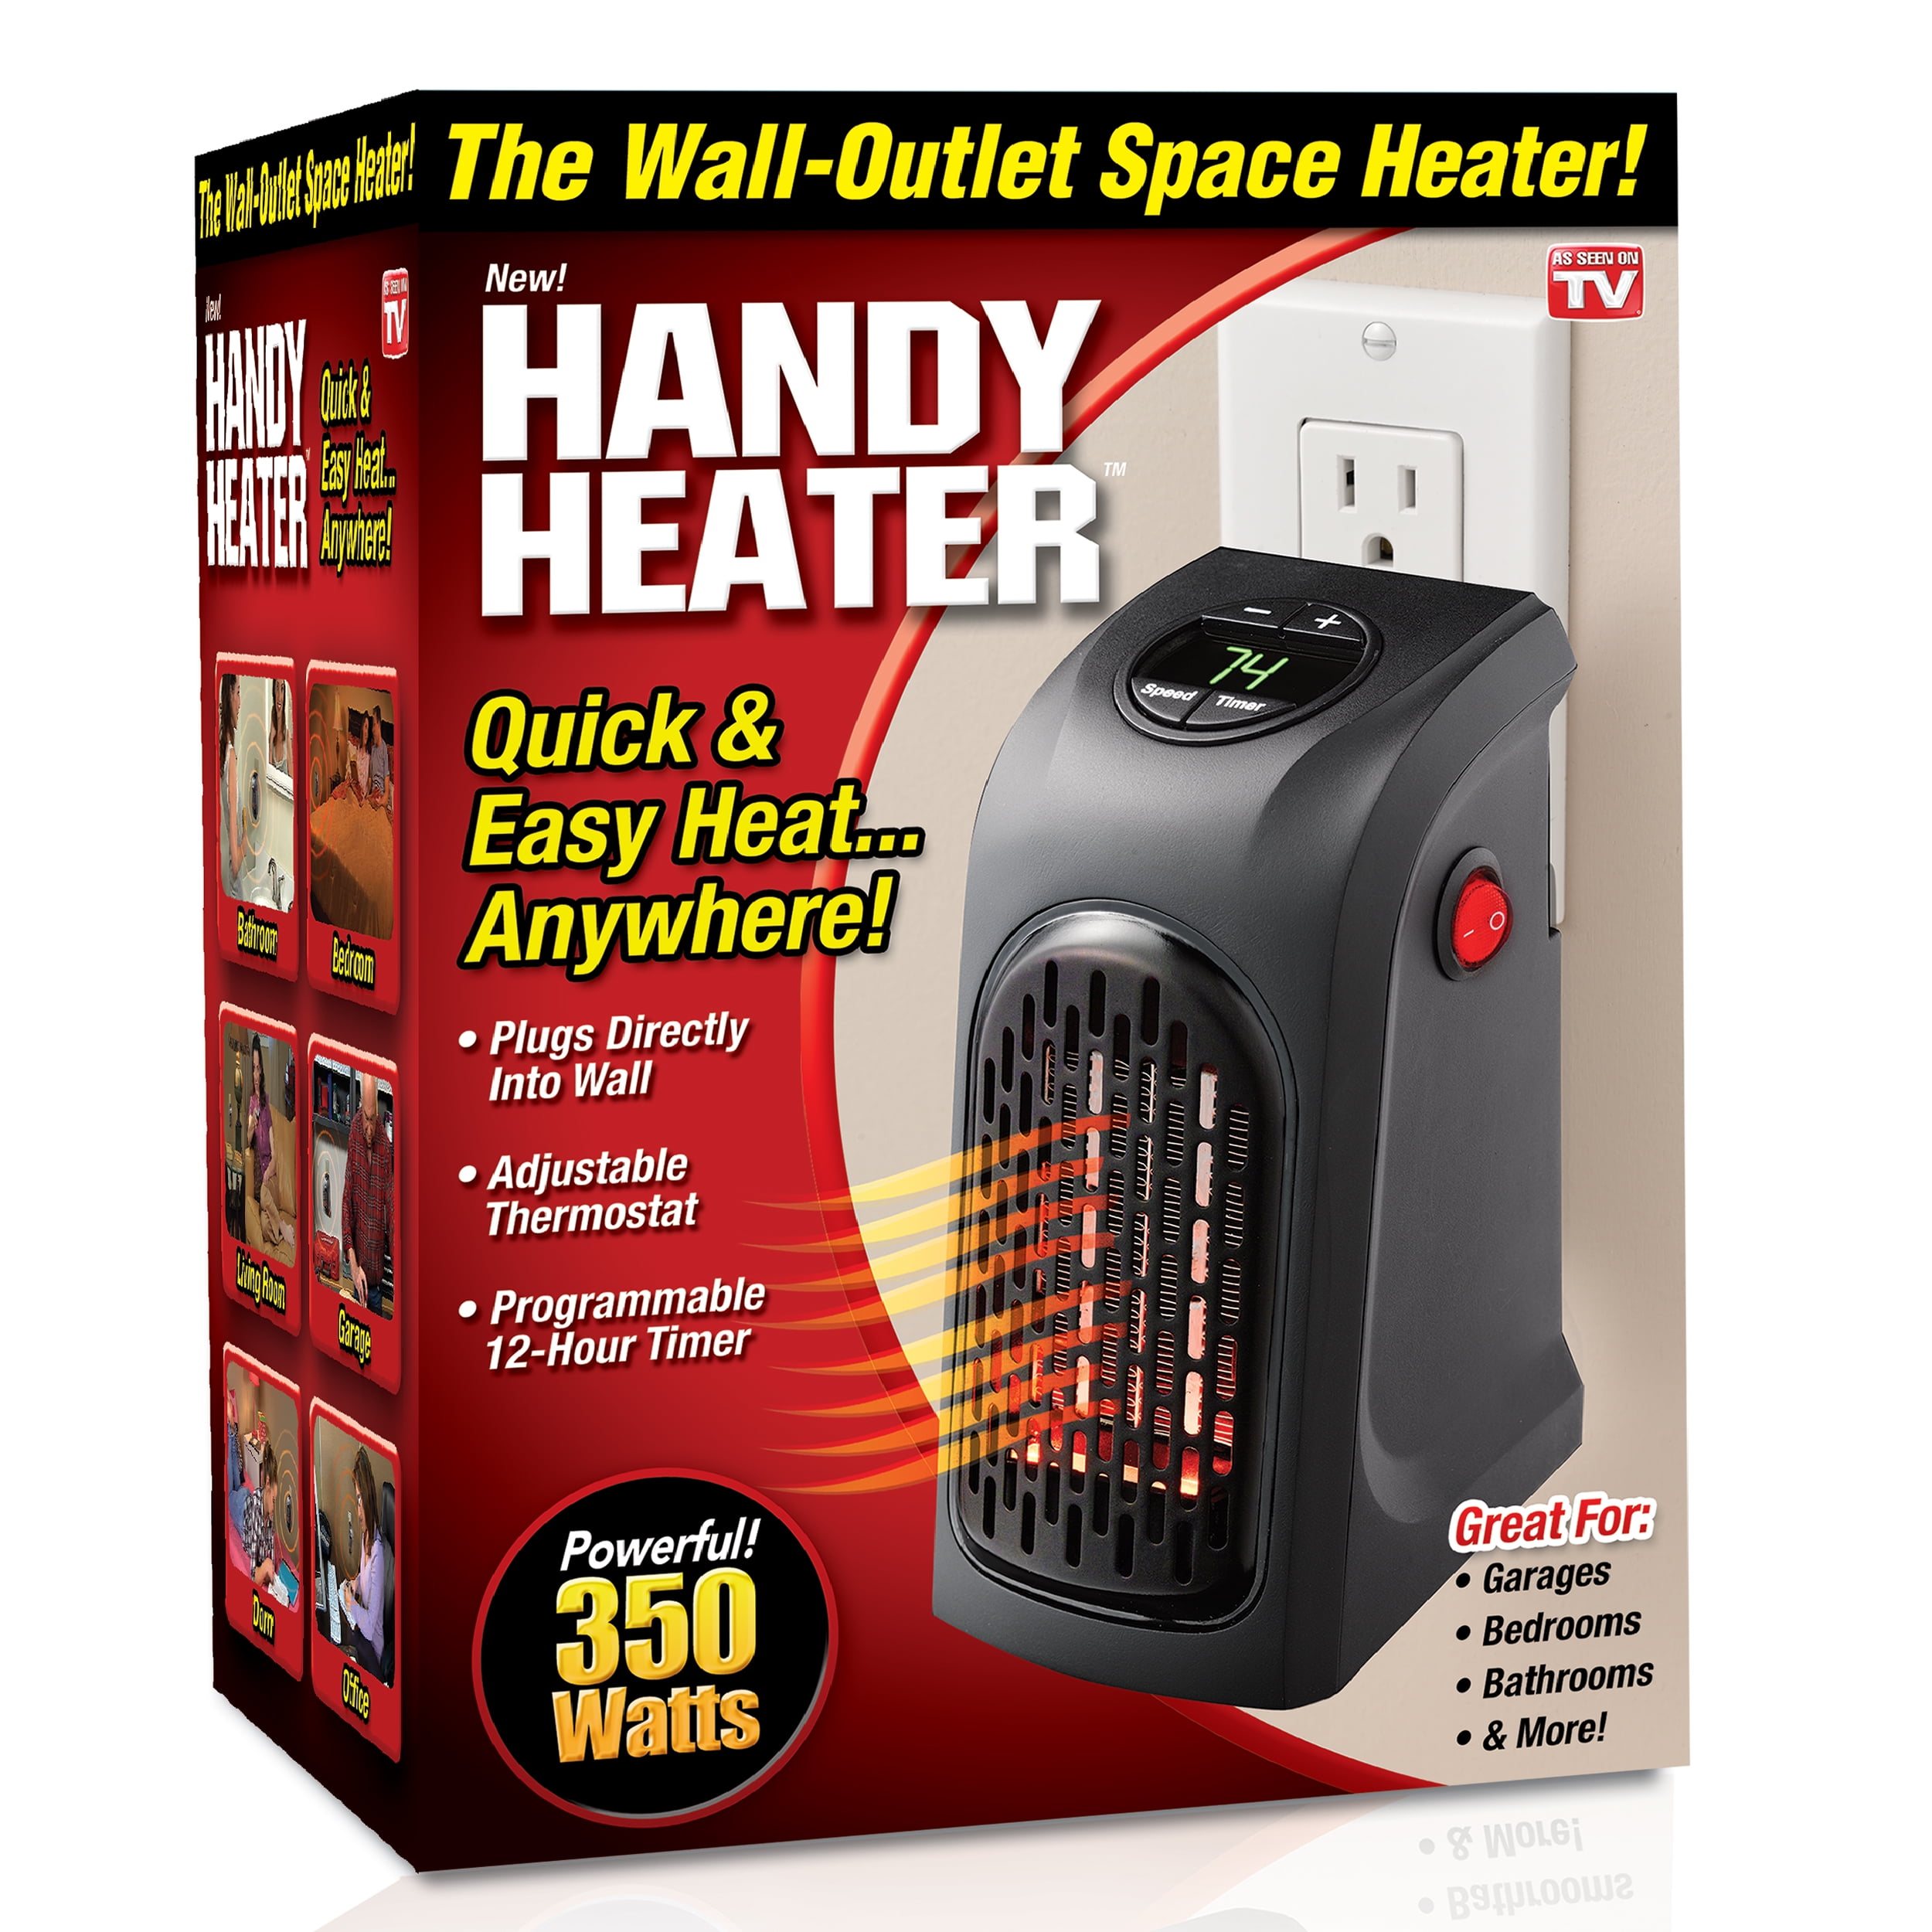 Portable Handy Heater Compact Plug-In Digital Electric Heater Fan Wall-Outlet 